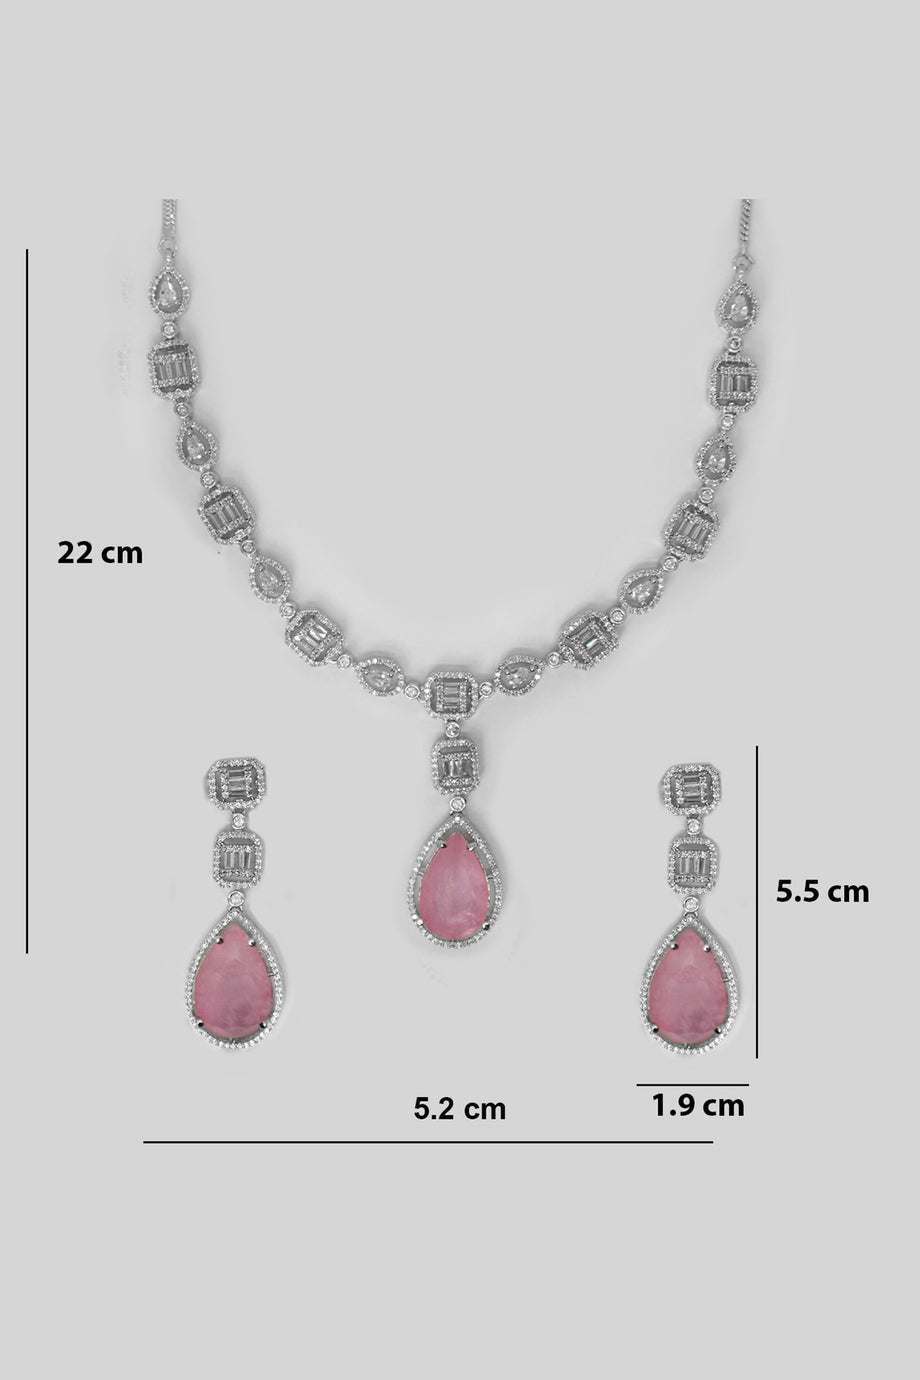 Buy Women's Women Pink Diamond Necklace Set with Earrings, Bracelet and  Jewellery (TF-CP-7) (Silver) at Amazon.in